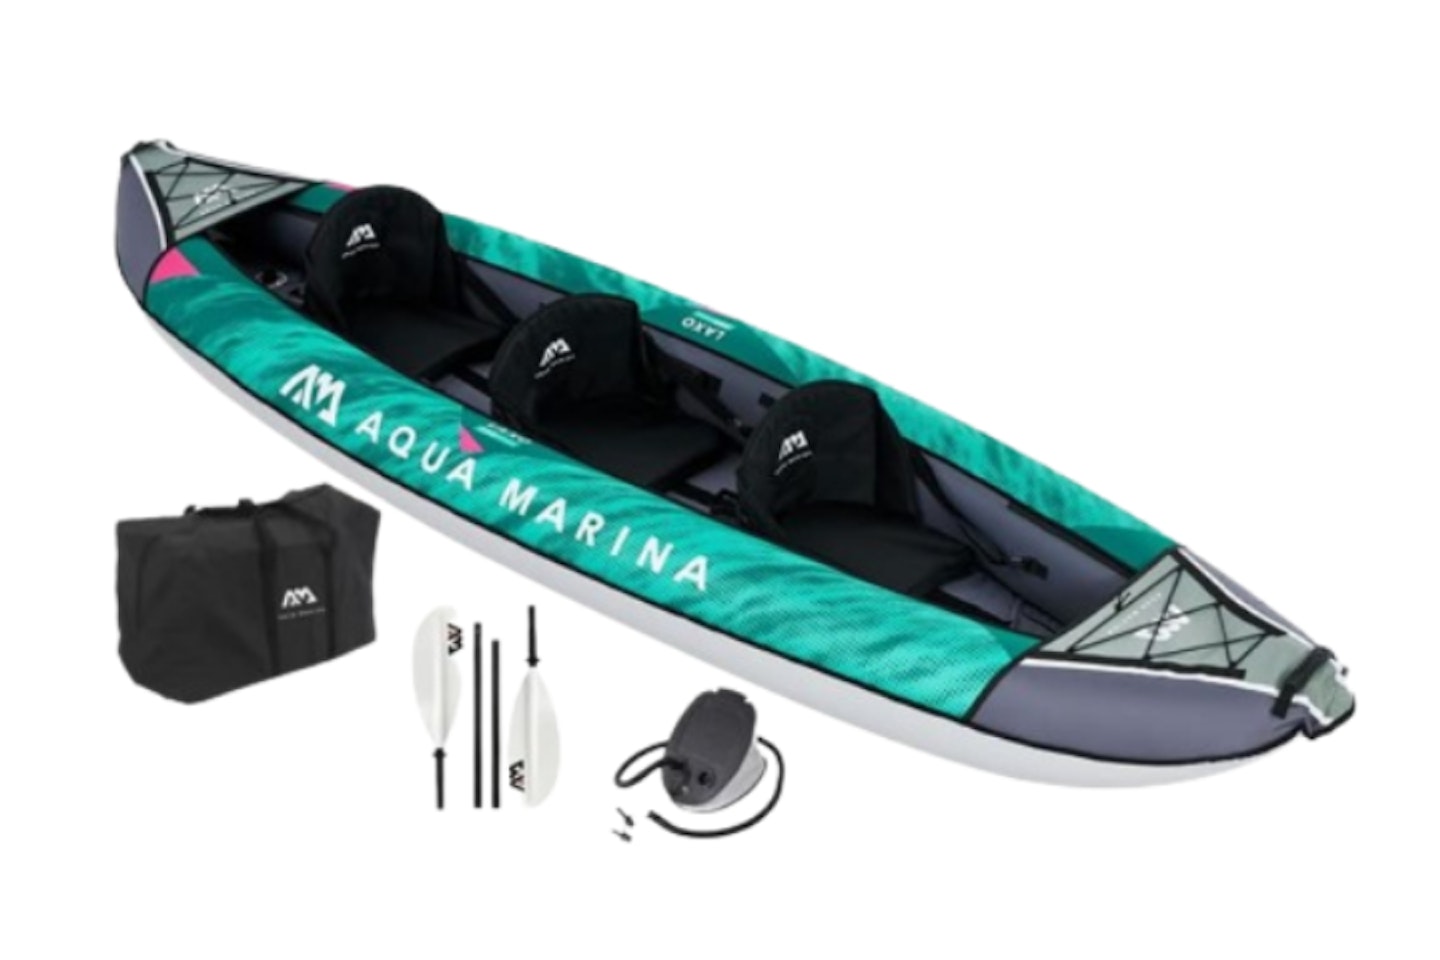 Aqua Marina Laxo Inflatable Leisure Kayak - one of the best three-person inflatable kayaks